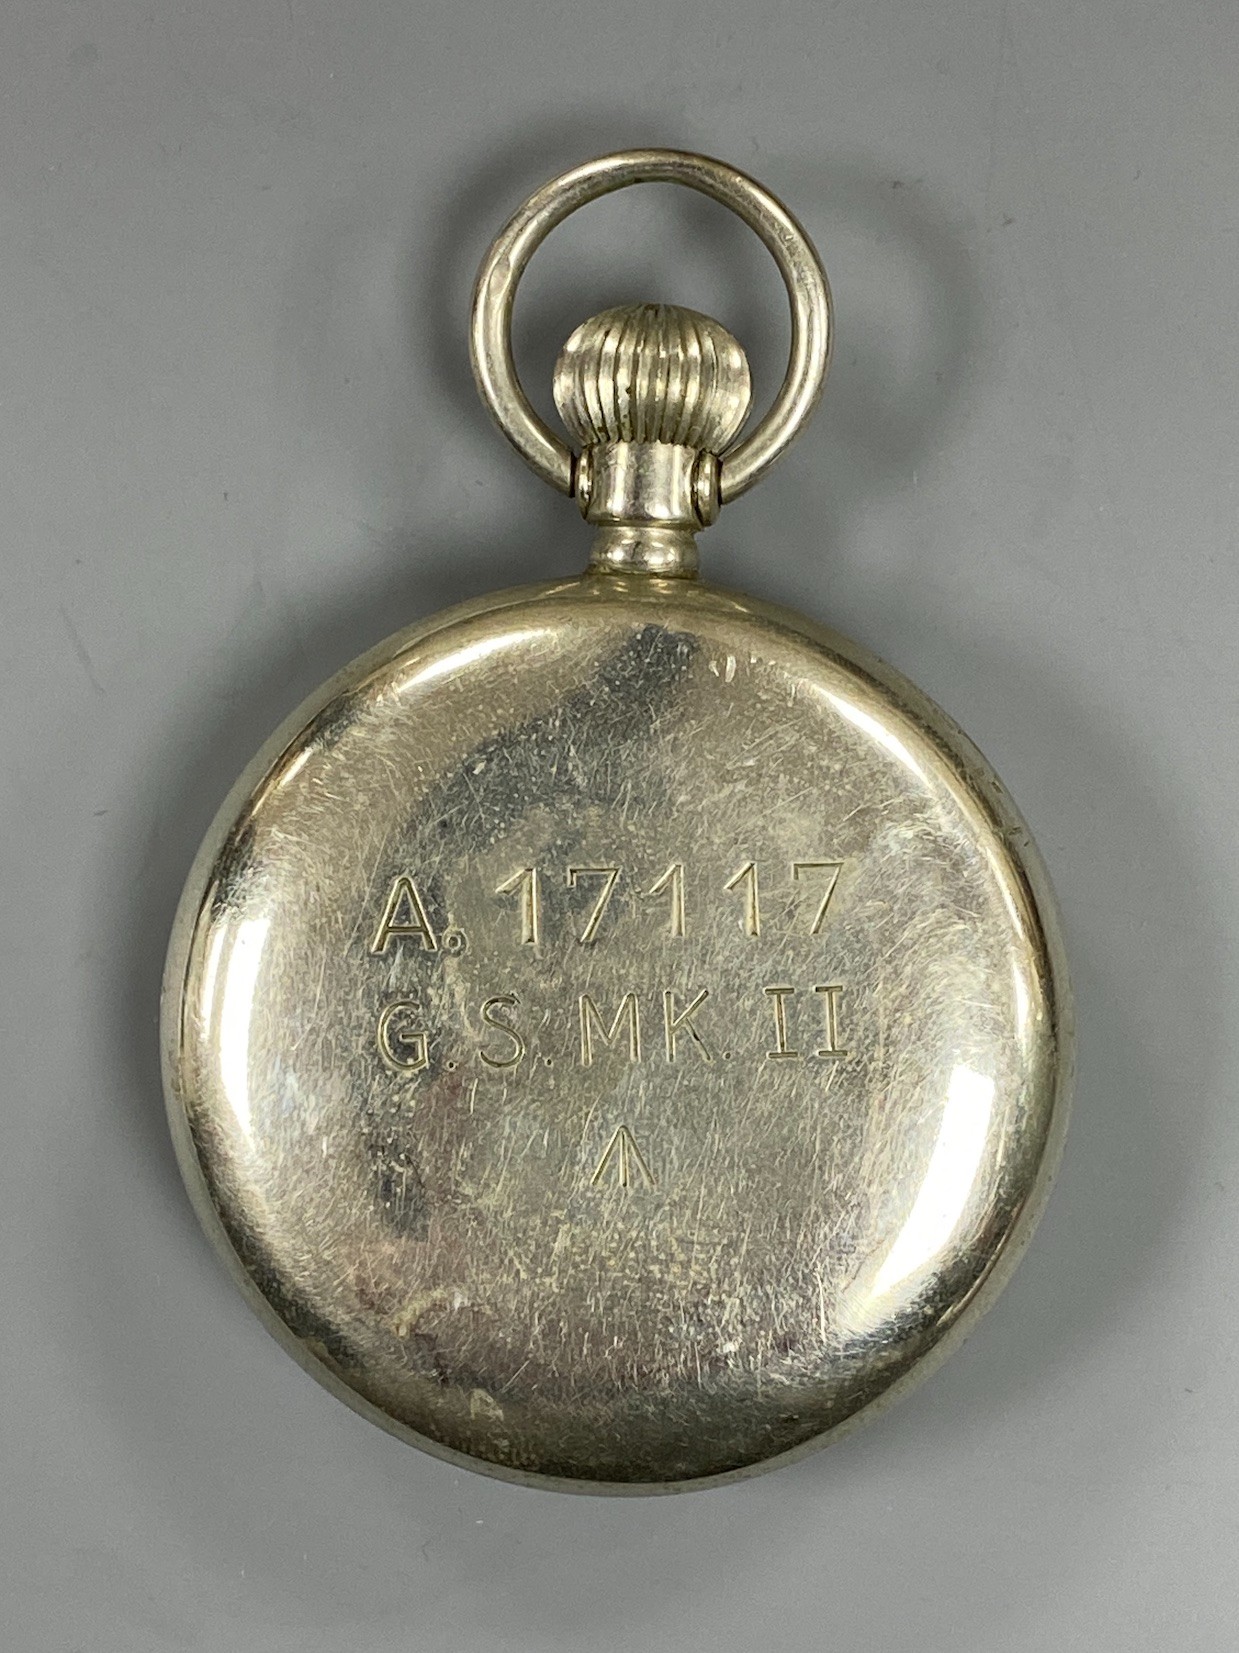 A mid 20th century nickel cased Rolex military issue open faced pocket watch, with black dial, case back with engraved broad arrow and numbered A.17117 G.S.MK.11, case diameter 50mm.